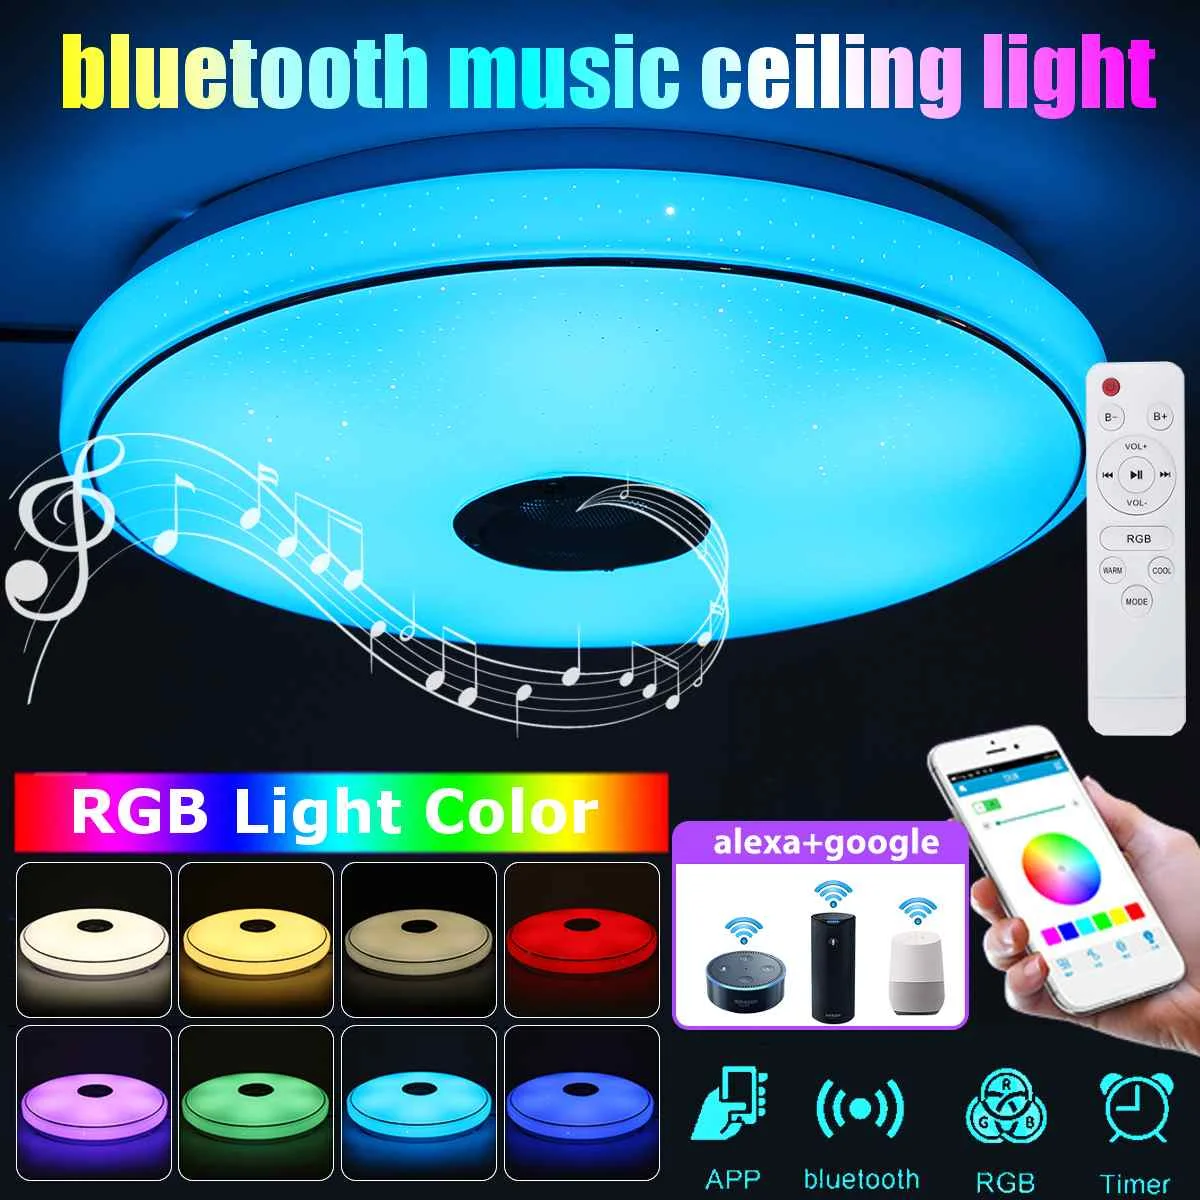 

72W 40CM WiFi Modern Smart RGB LED Light Ceiling Lamp RGB+Dimmable Home APP Bluetooth Music Ceiling Light With Remote Control